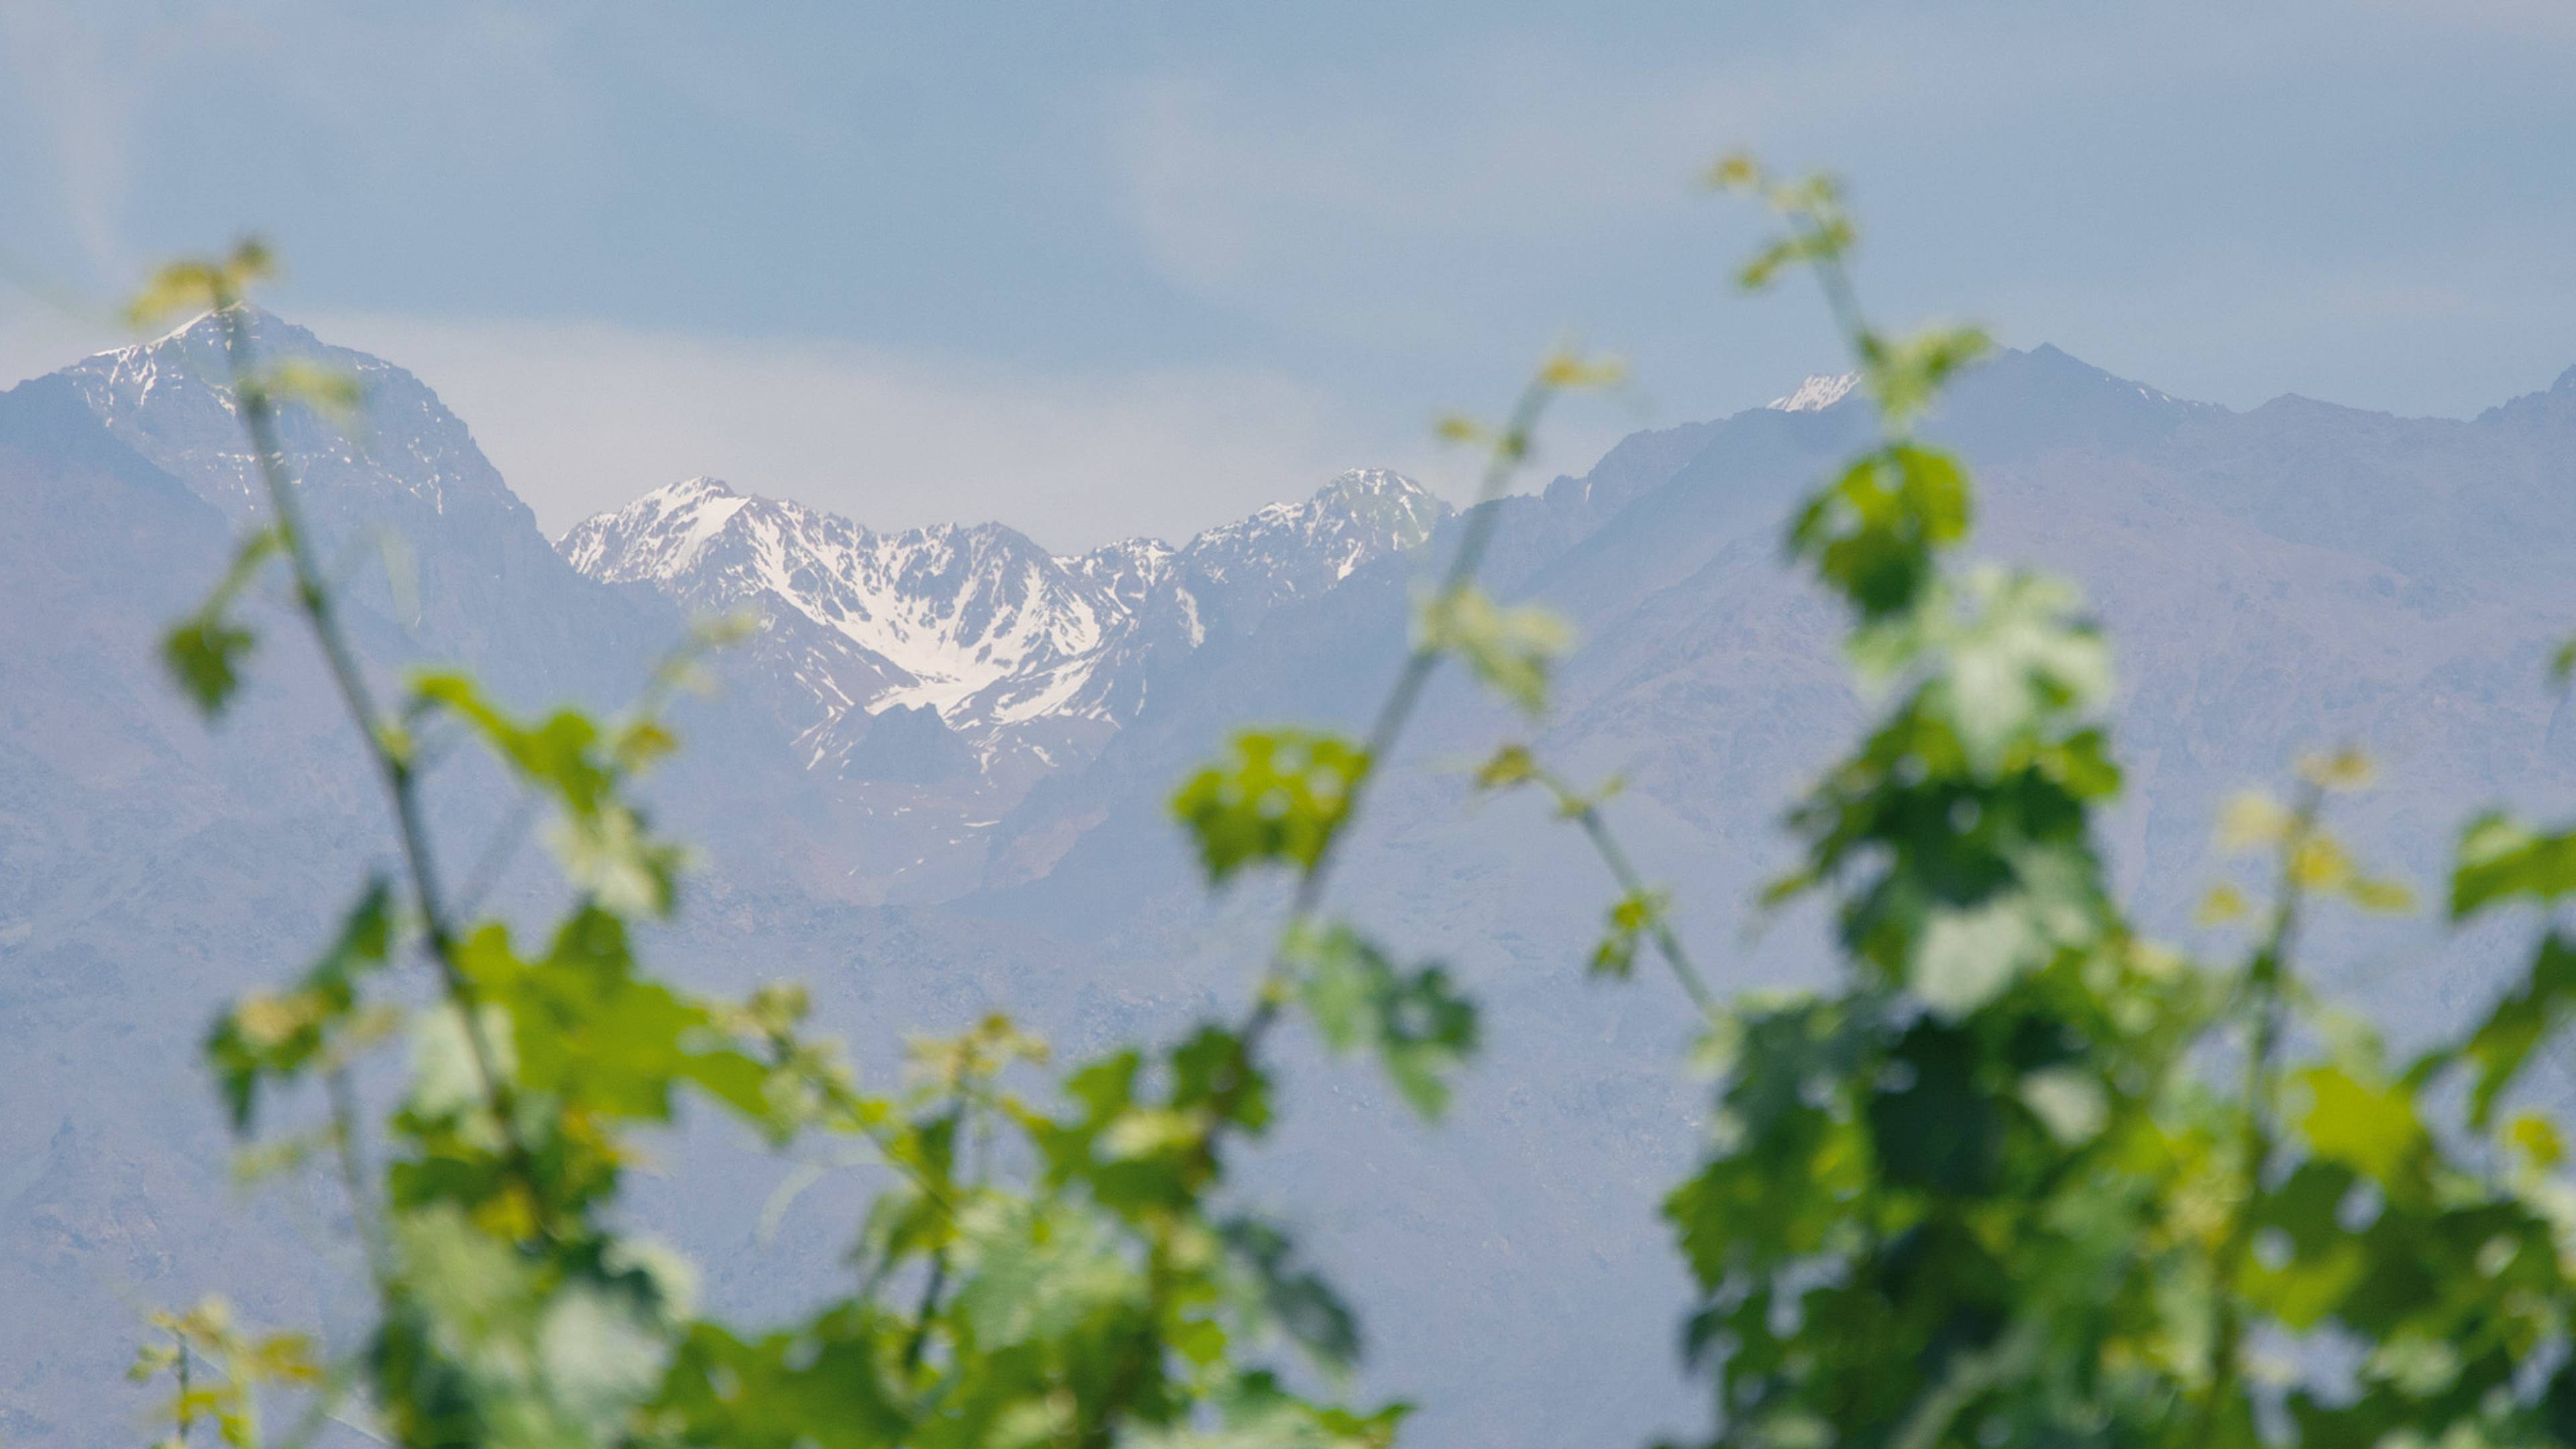 Close up of blurry green leaves from vineyard and mountain